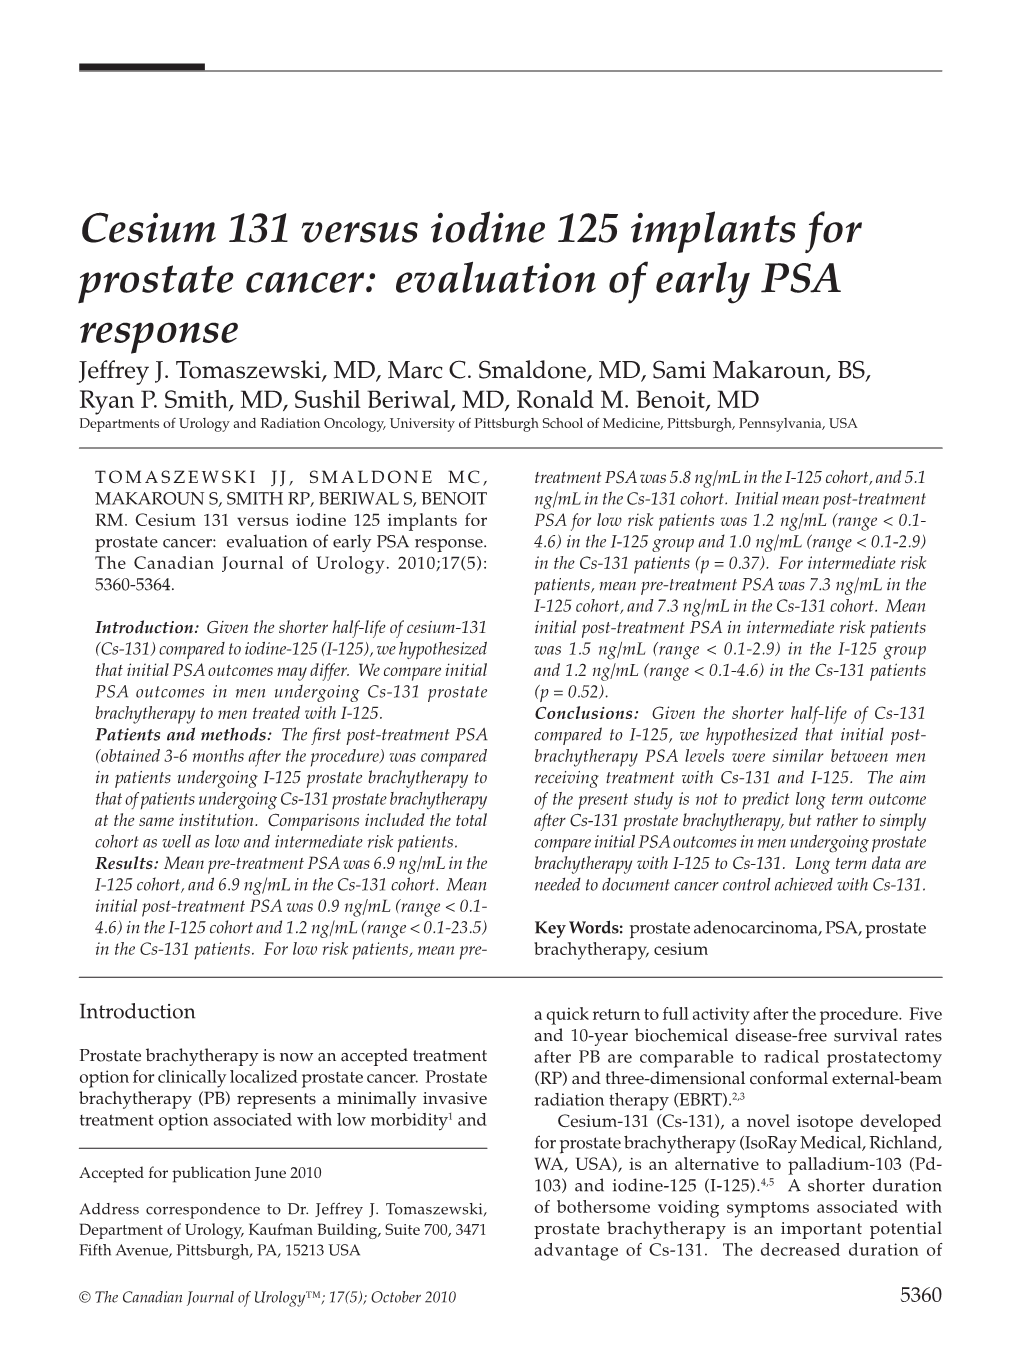 Cesium 131 Versus Iodine 125 Implants for Prostate Cancer: Evaluation of Early PSA Response Jeffrey J